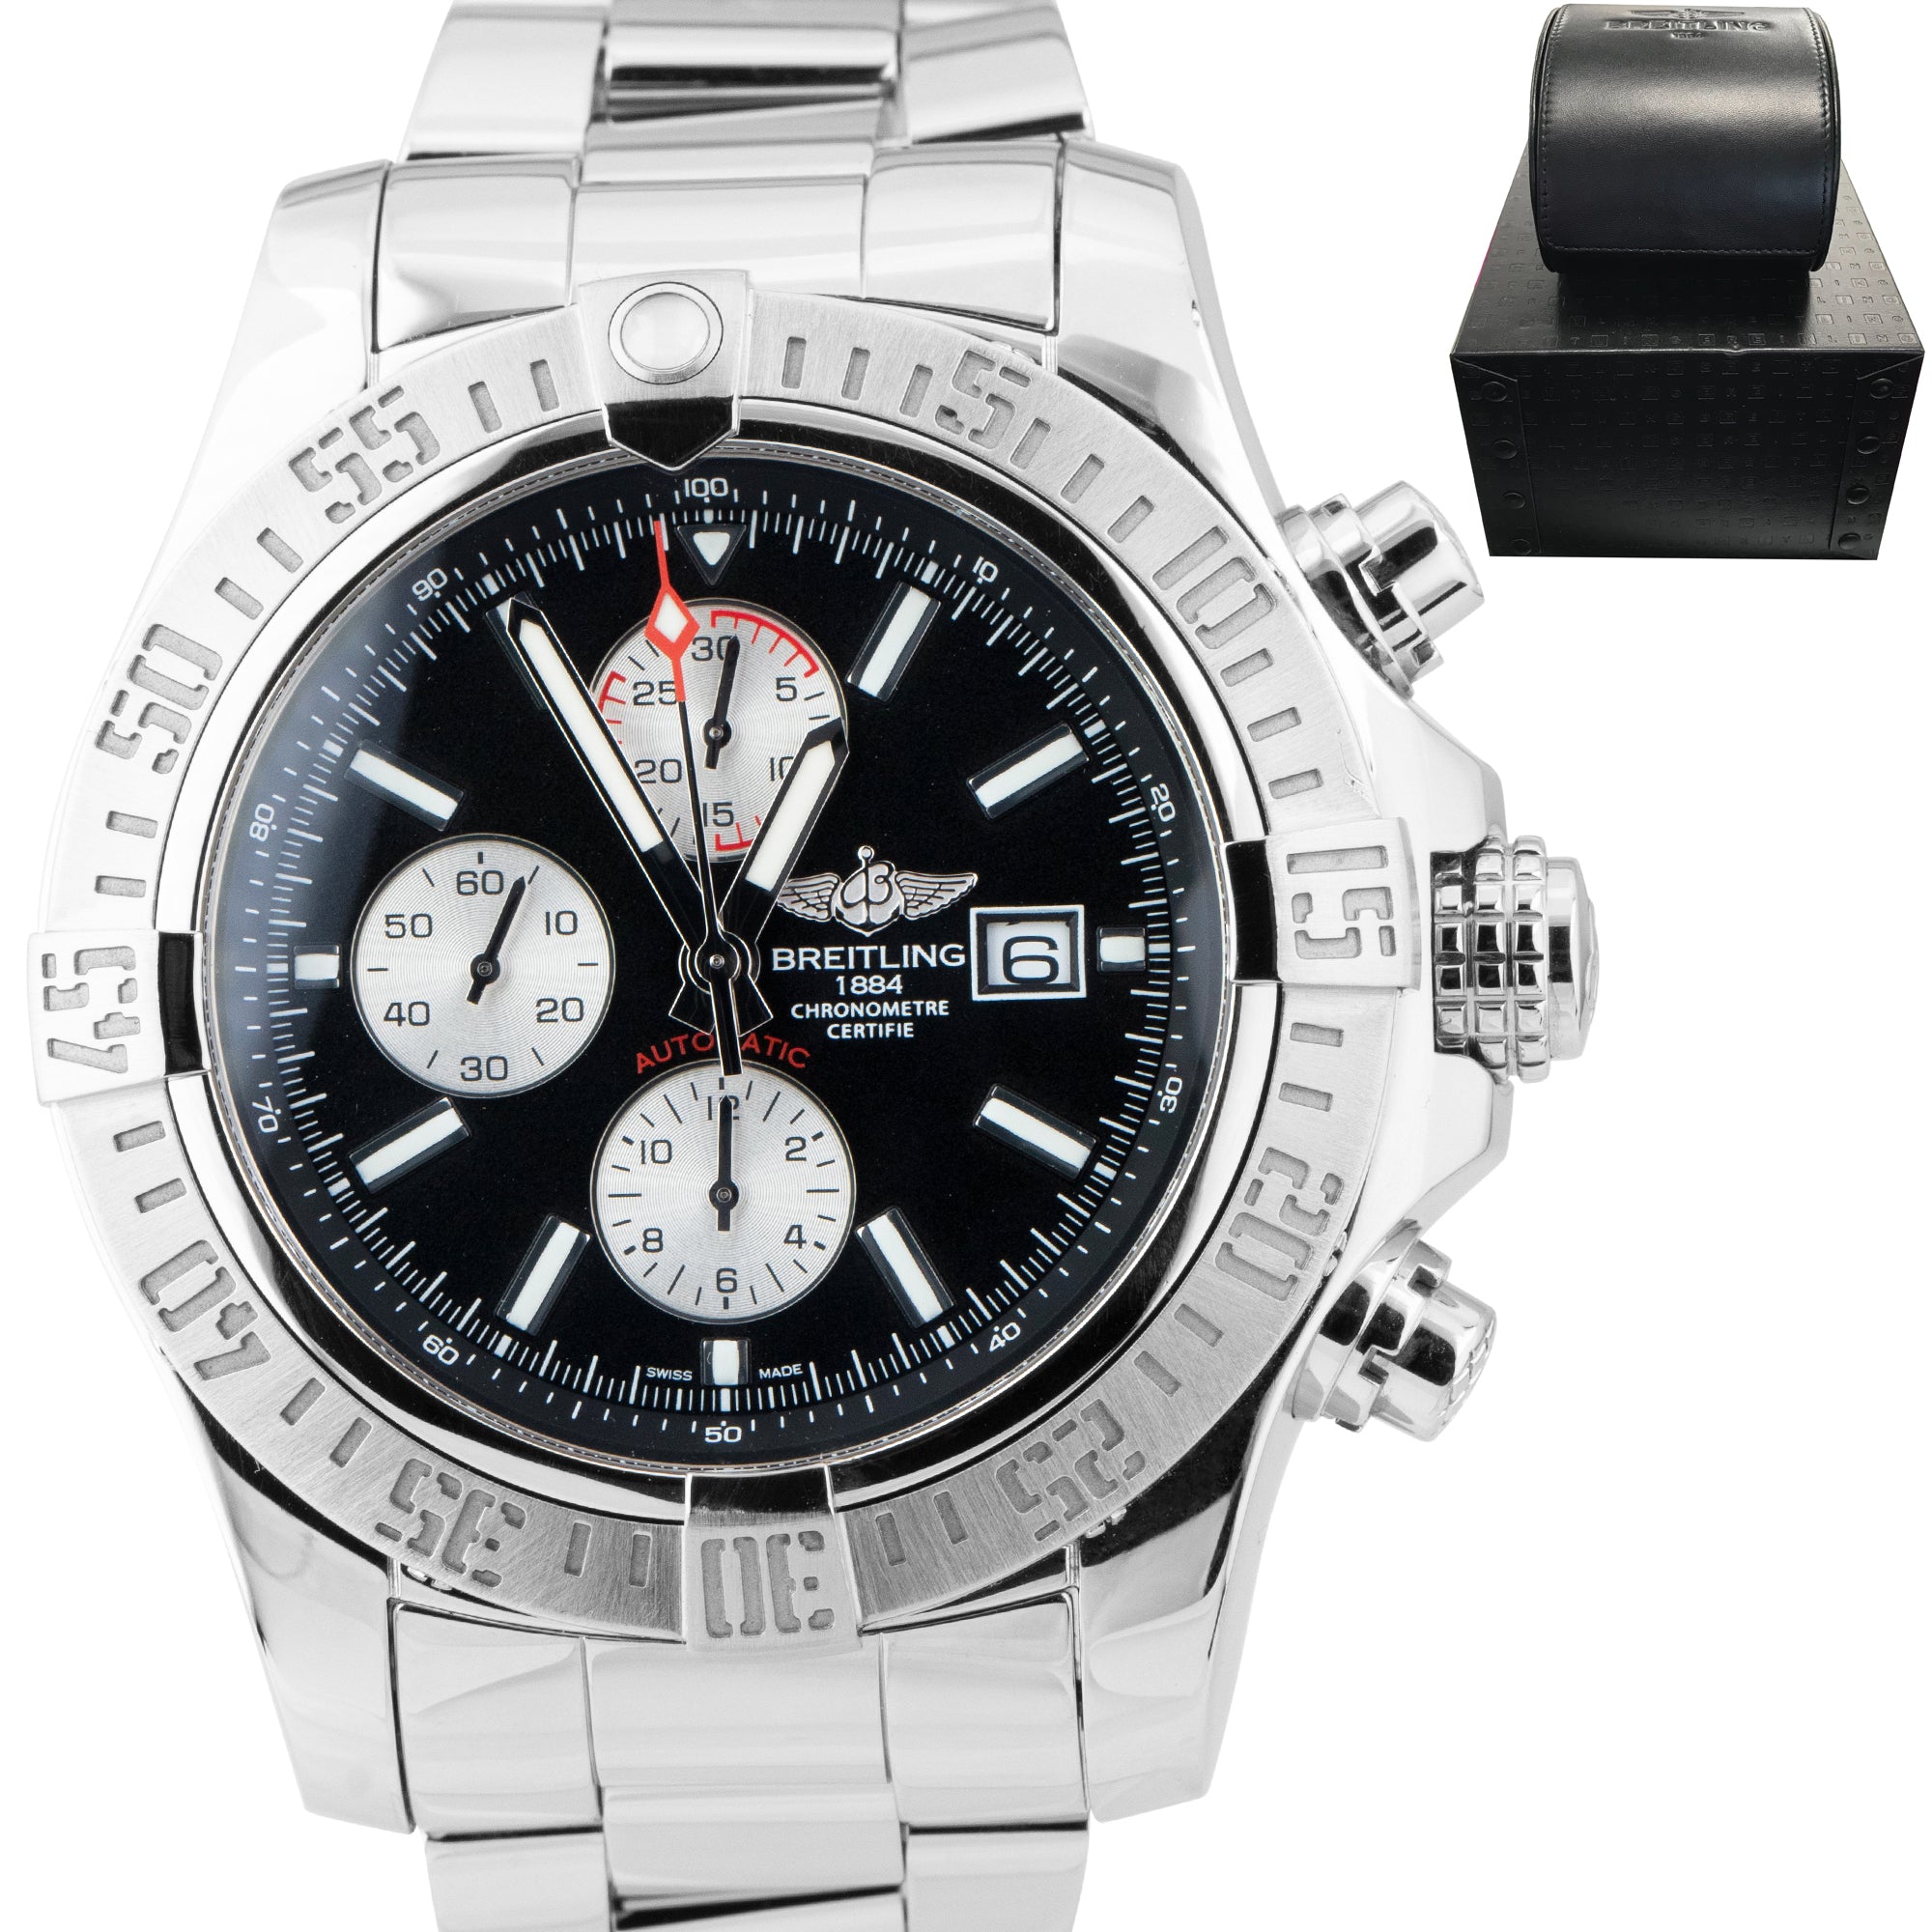 Breitling Super Avenger II Chronograph 48mm Black Stainless Steel A13371 Watch